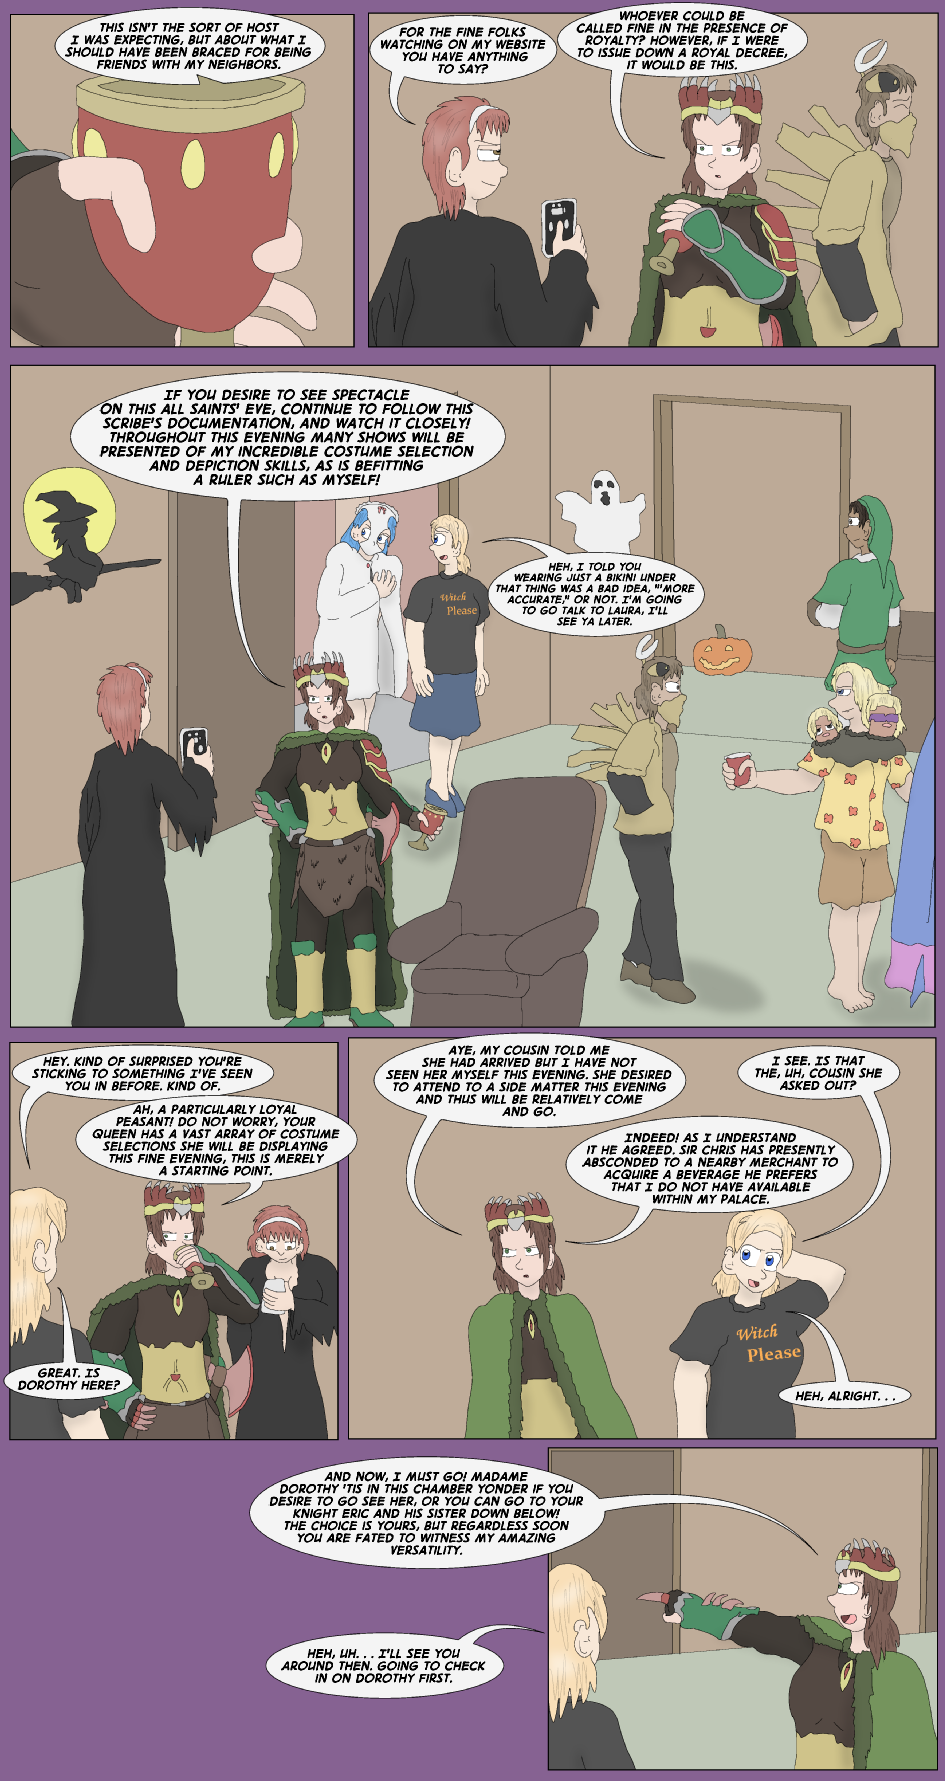 The DeKalb County Public Access Halloween Special, Page 6